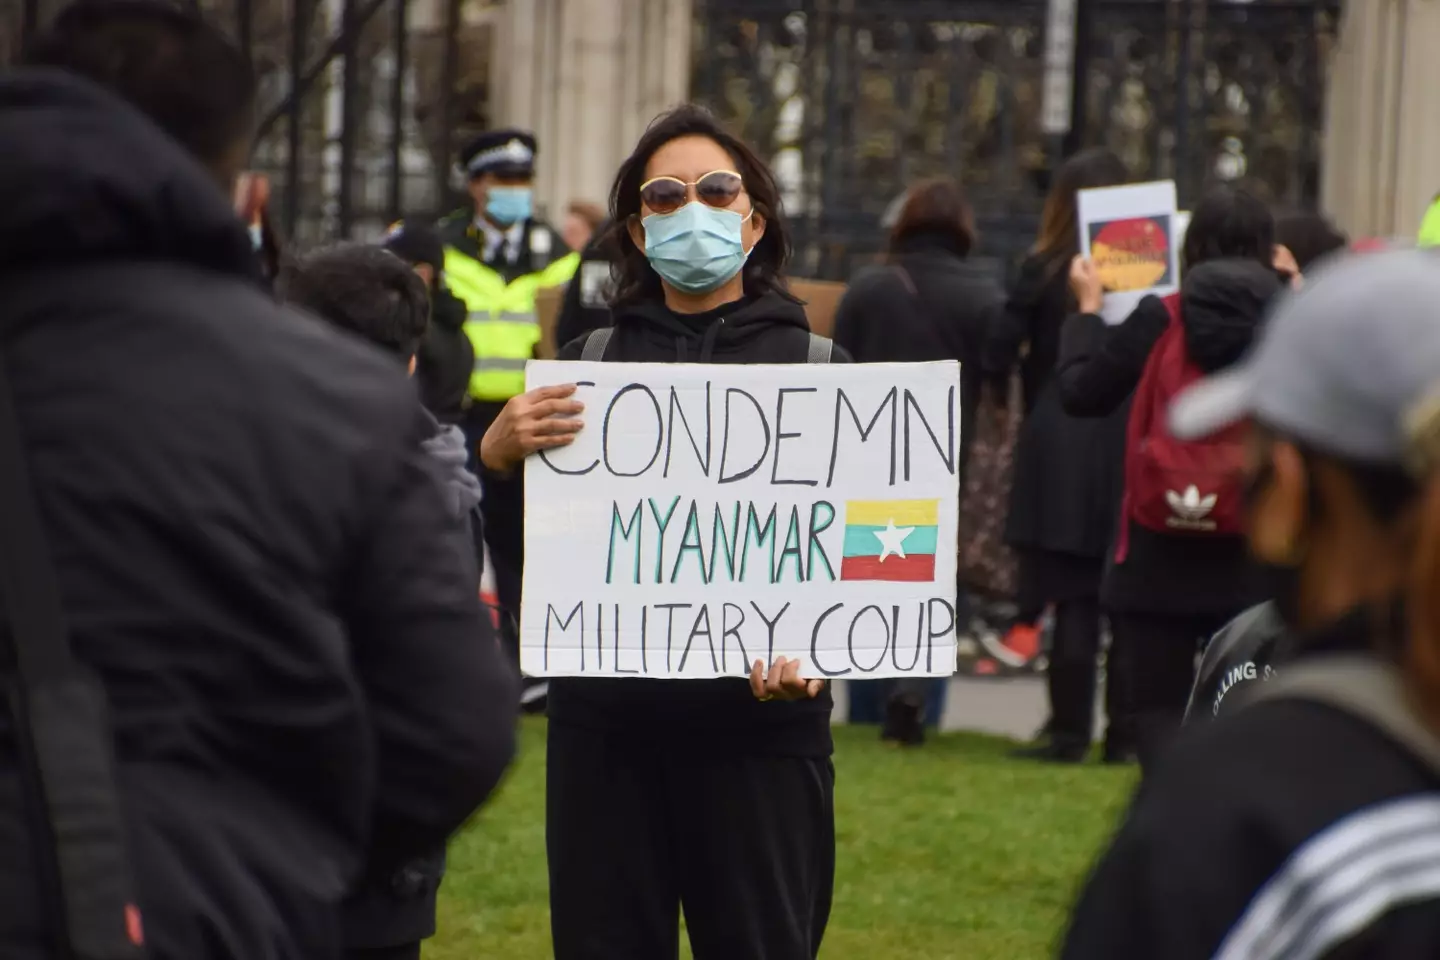 Protesters condemned the military coup in Parliament Square.